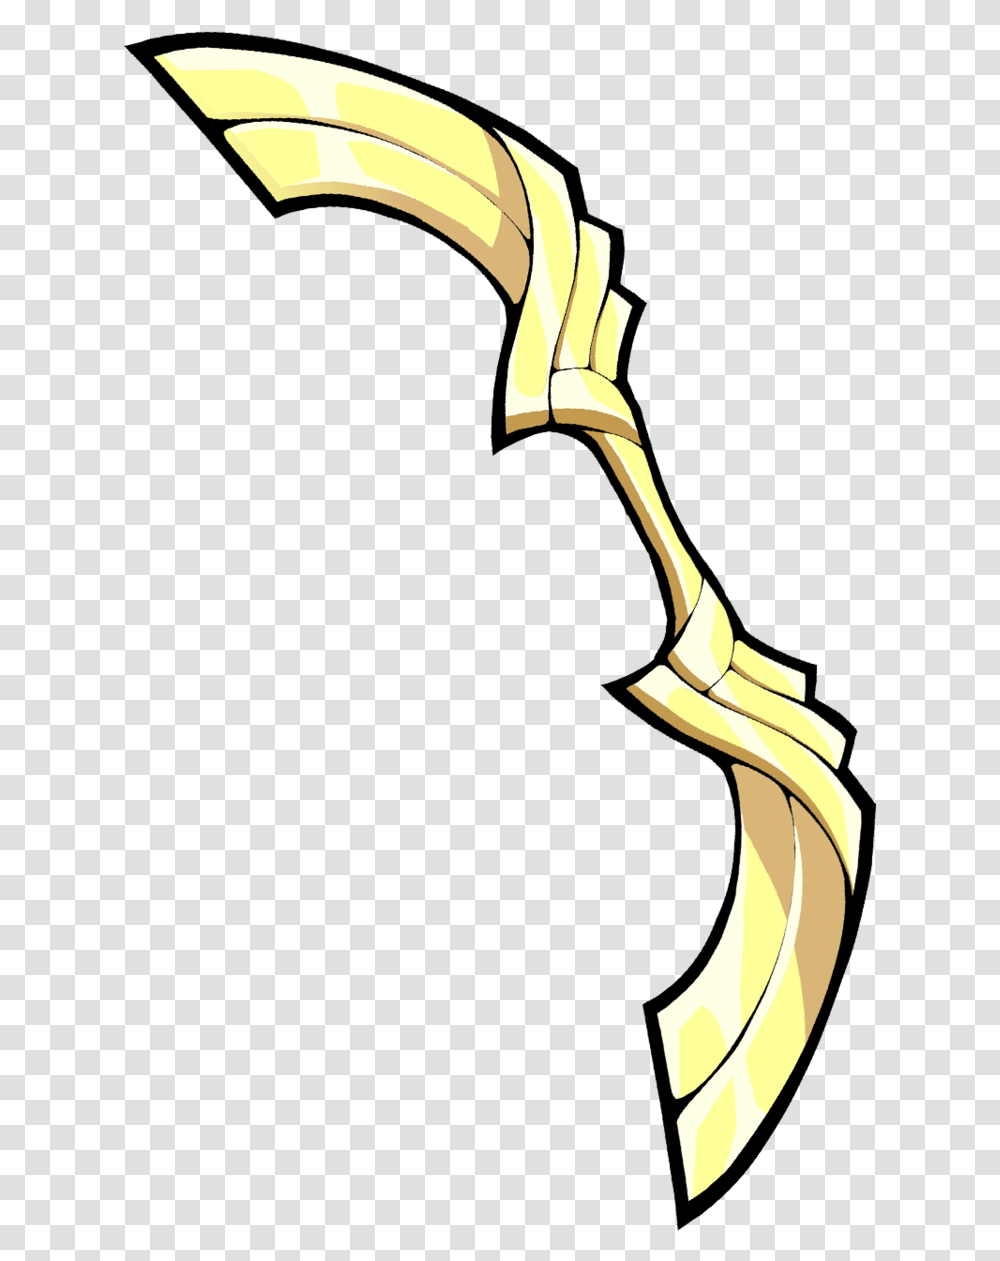 Brawlhalla Bow, Axe, Tool, Hammer, Plant Transparent Png